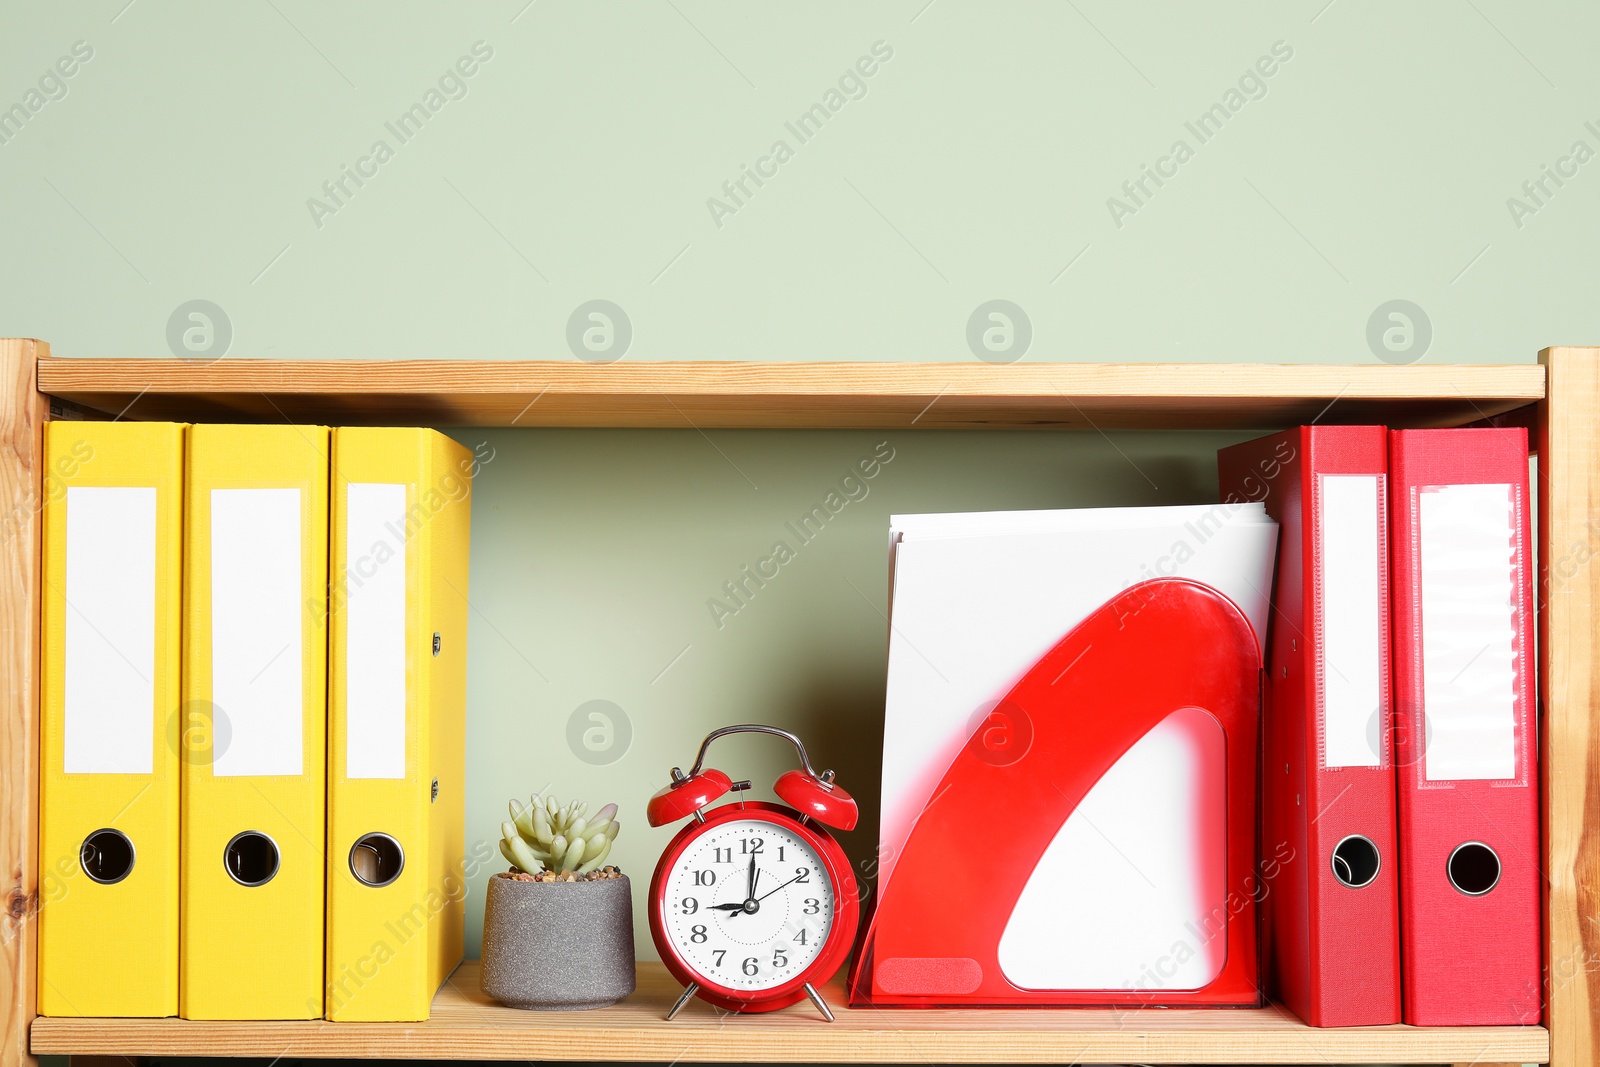 Photo of Colorful binder office folders and stationery on shelving unit indoors